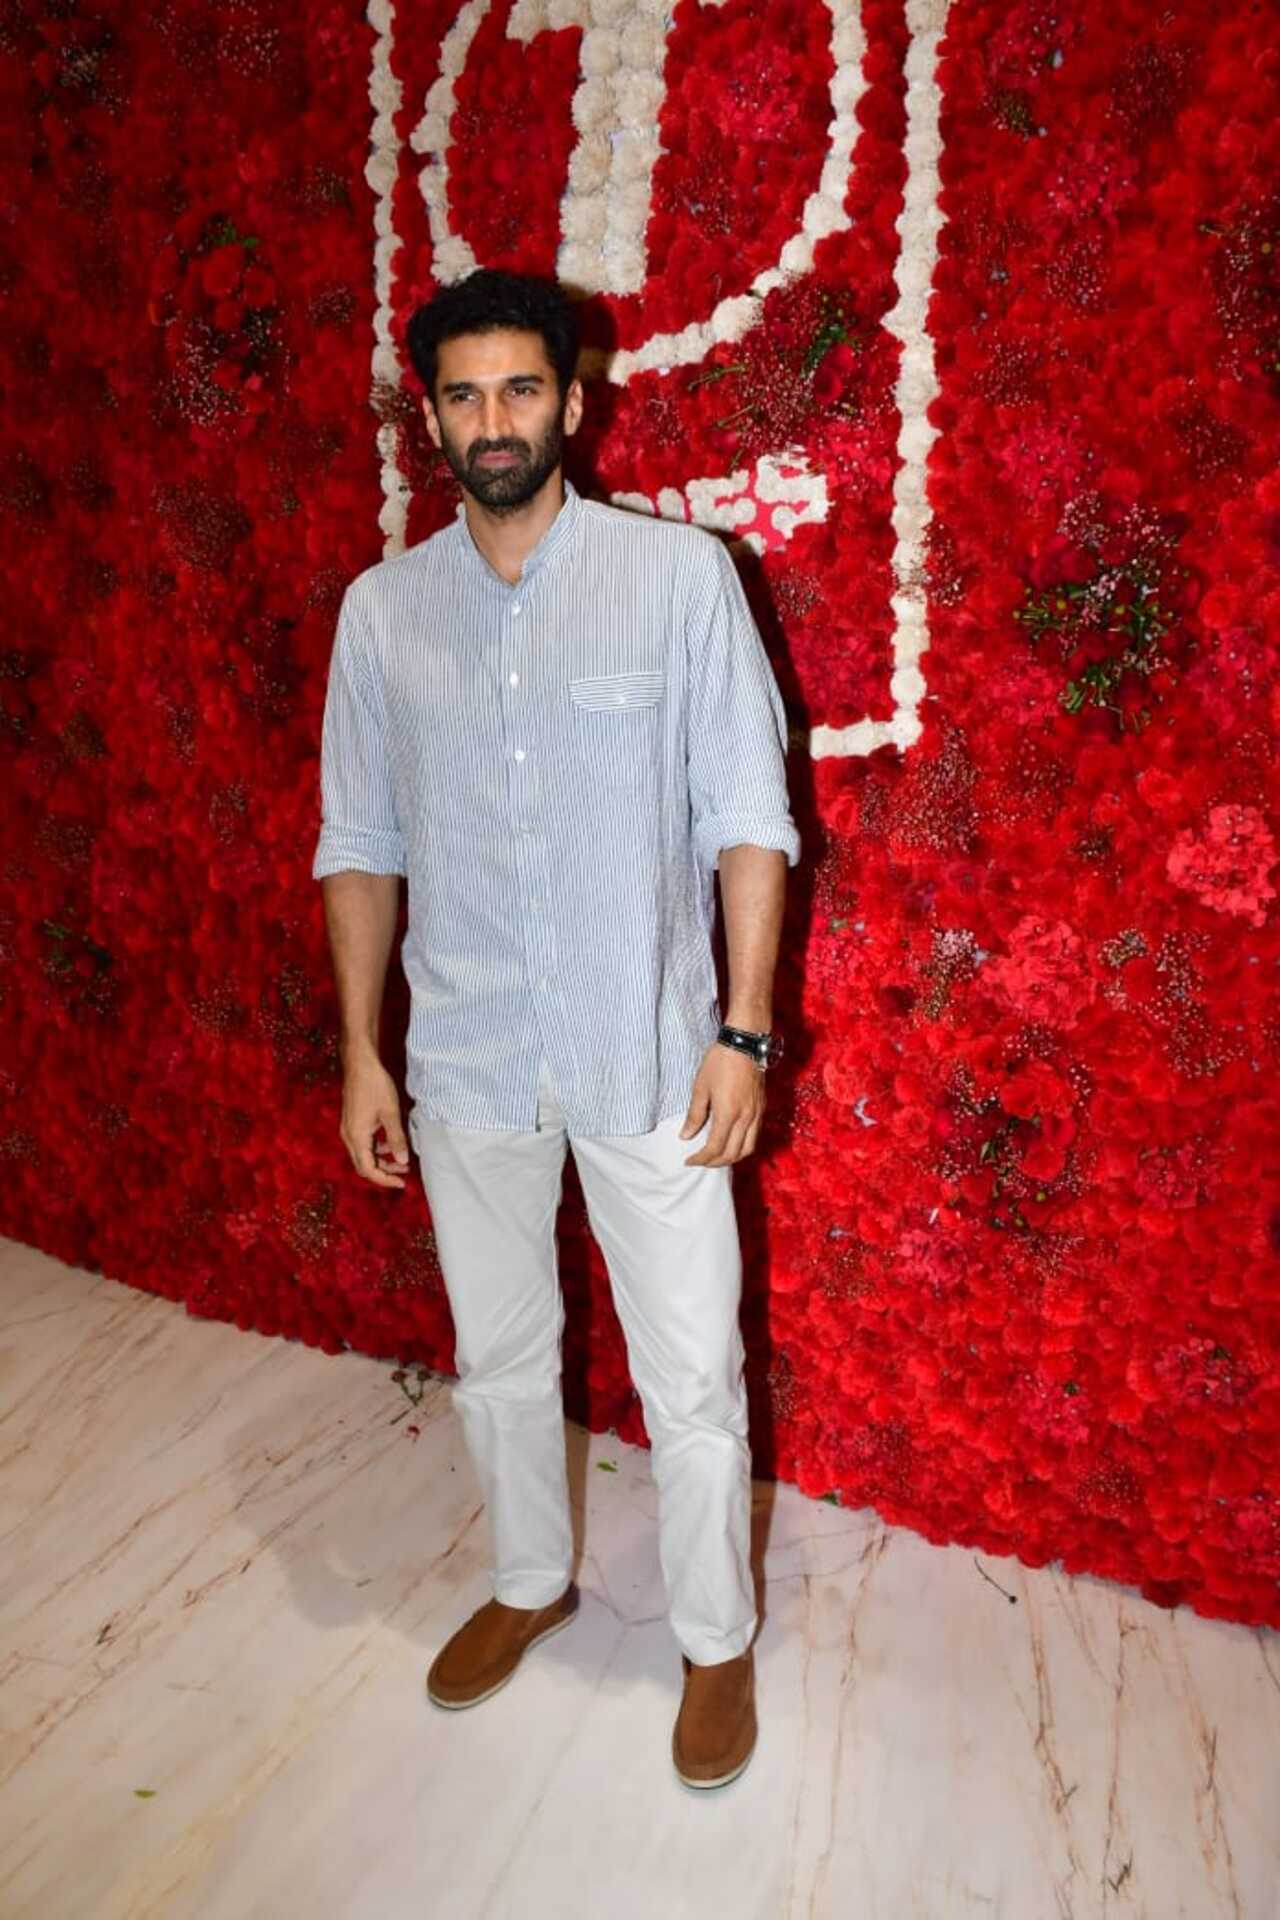 Aditya Roy Kapur was seen at the T-Series office for the Ganesh Chaturthi celebration